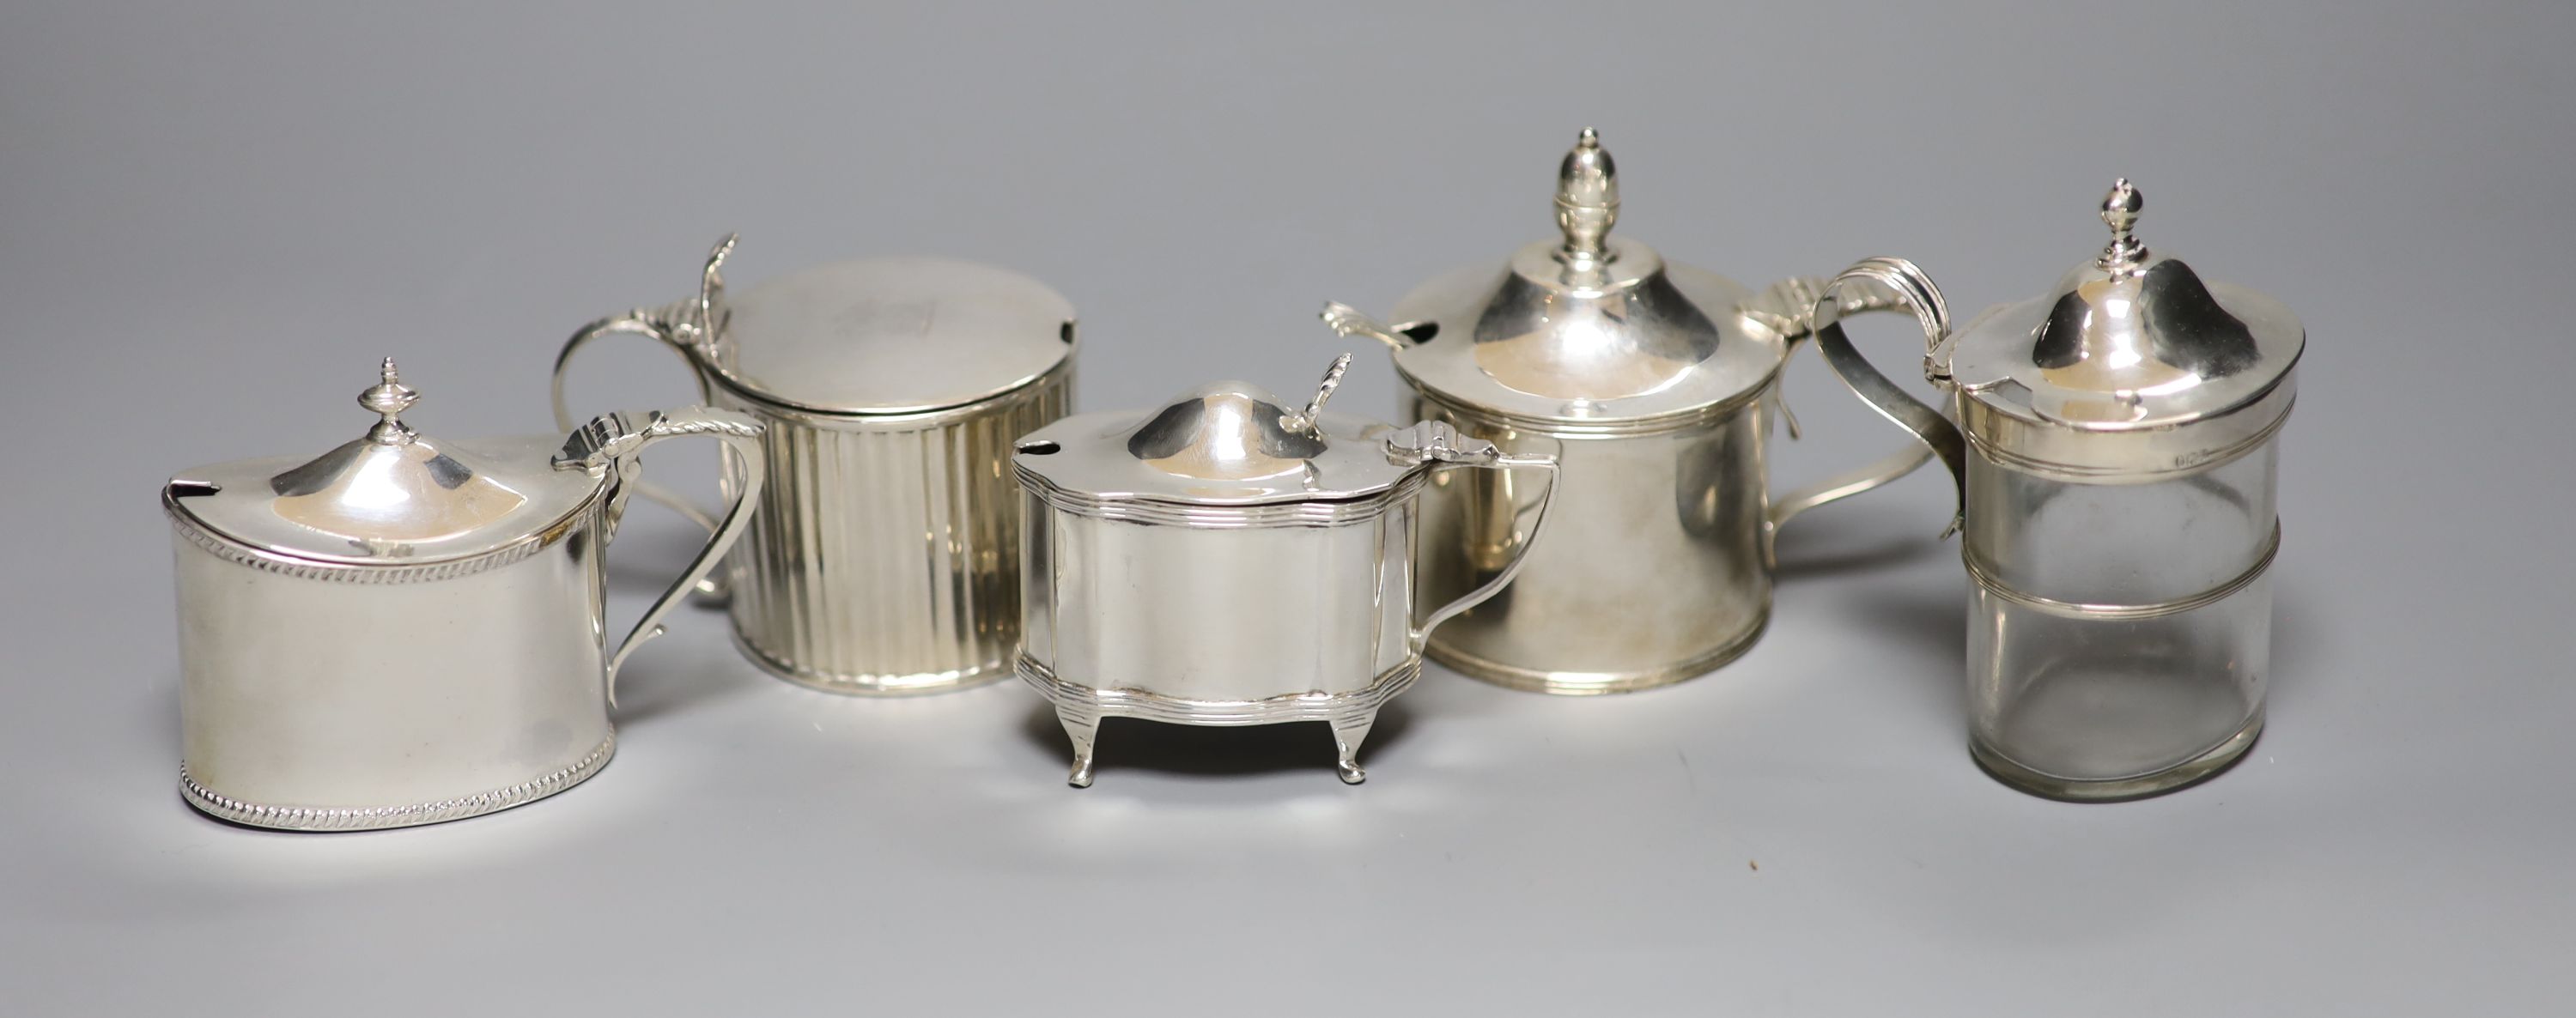 Five mustard pots, various, including a large cylindrical mustard by Mappin & Webb, 1934 Jubilee mark, a similar reeded George III mustard